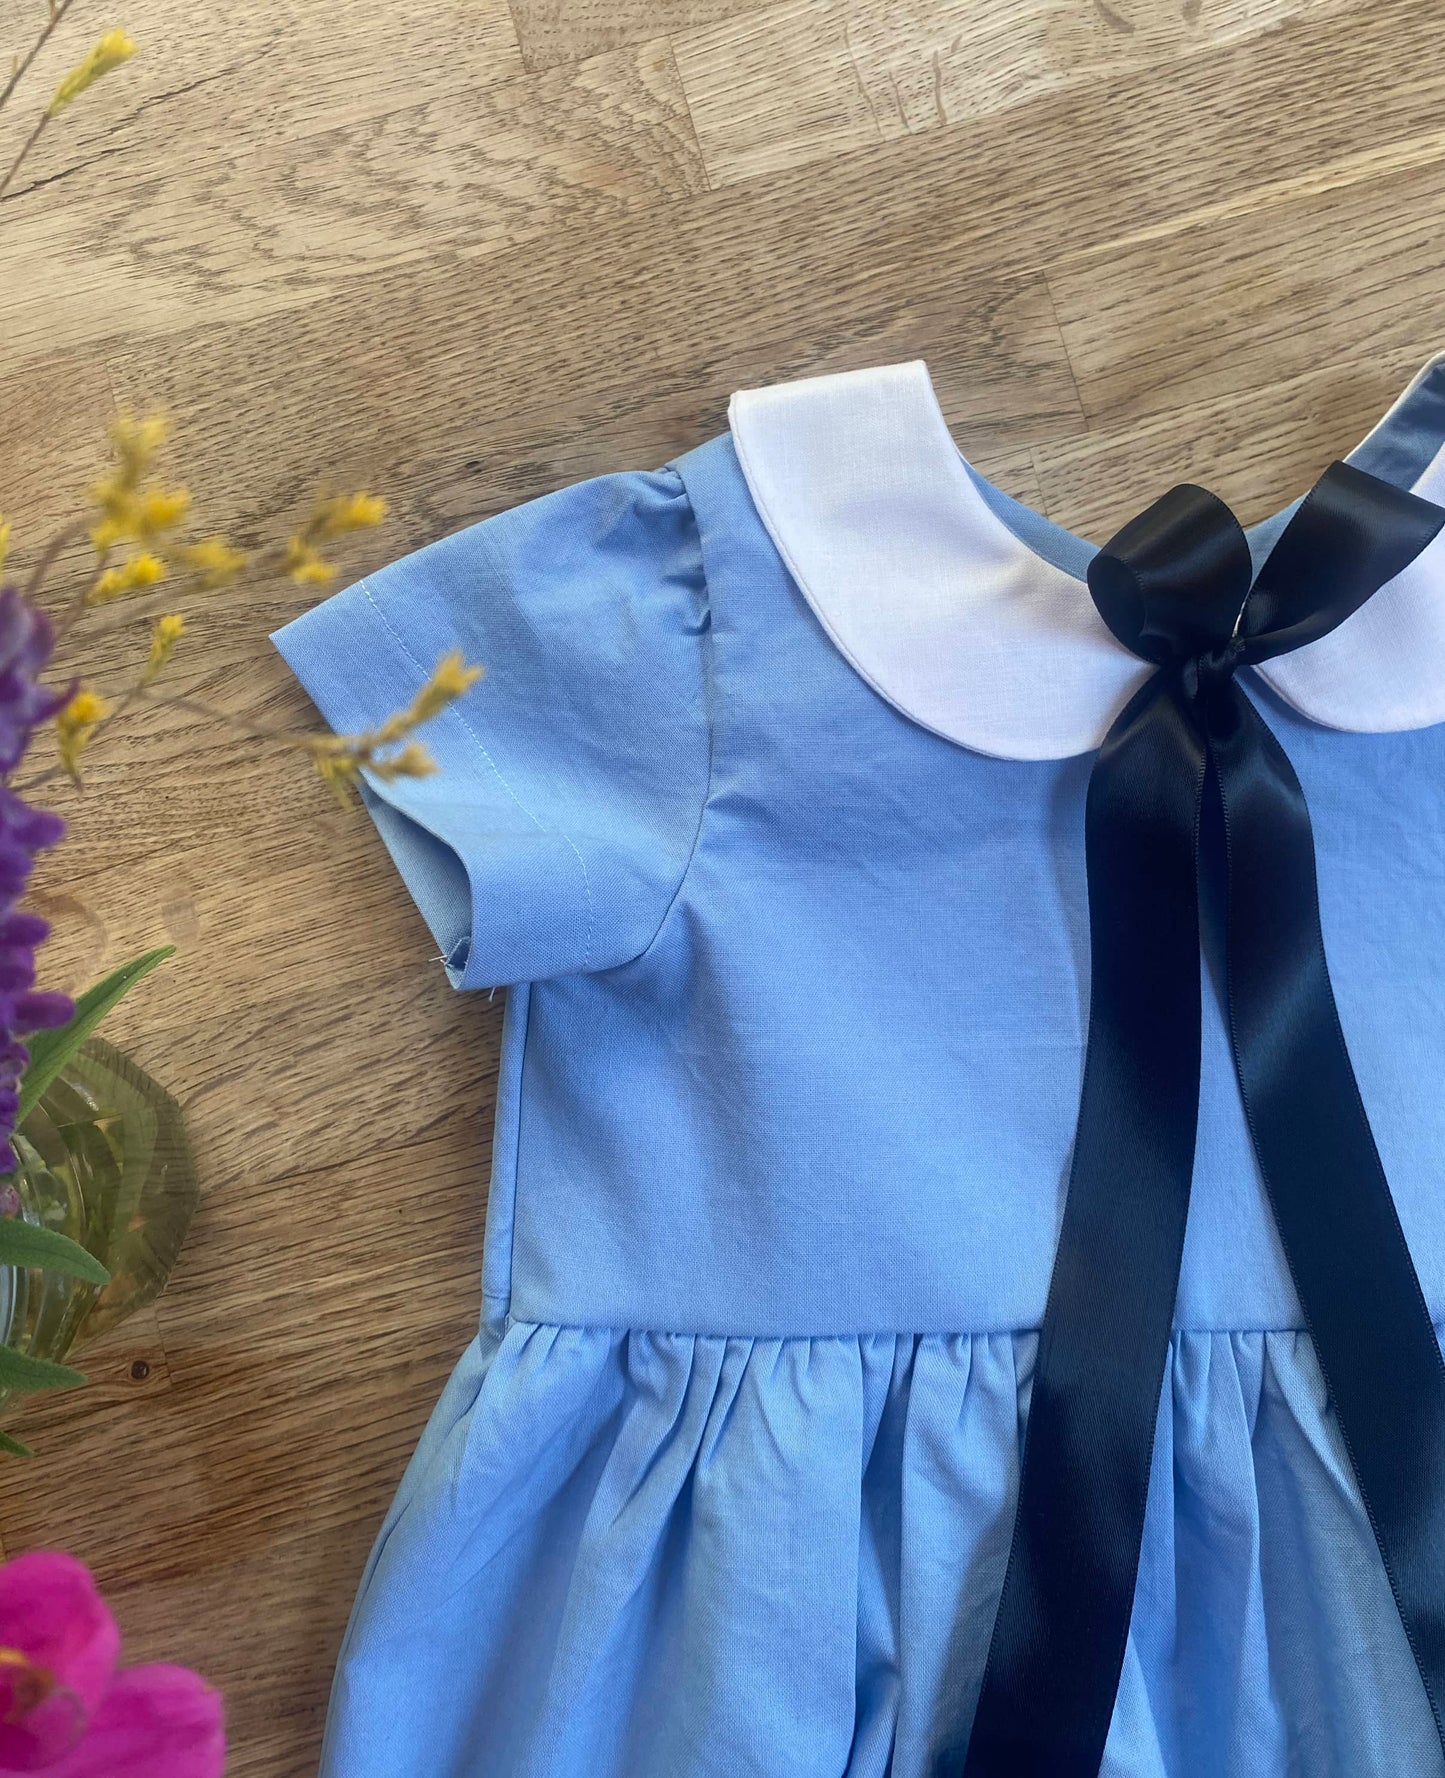 Alice in Wonderland Inspired, Light Blue Vintage Style Dress with Peter Pan Collar (MADE TO ORDER)